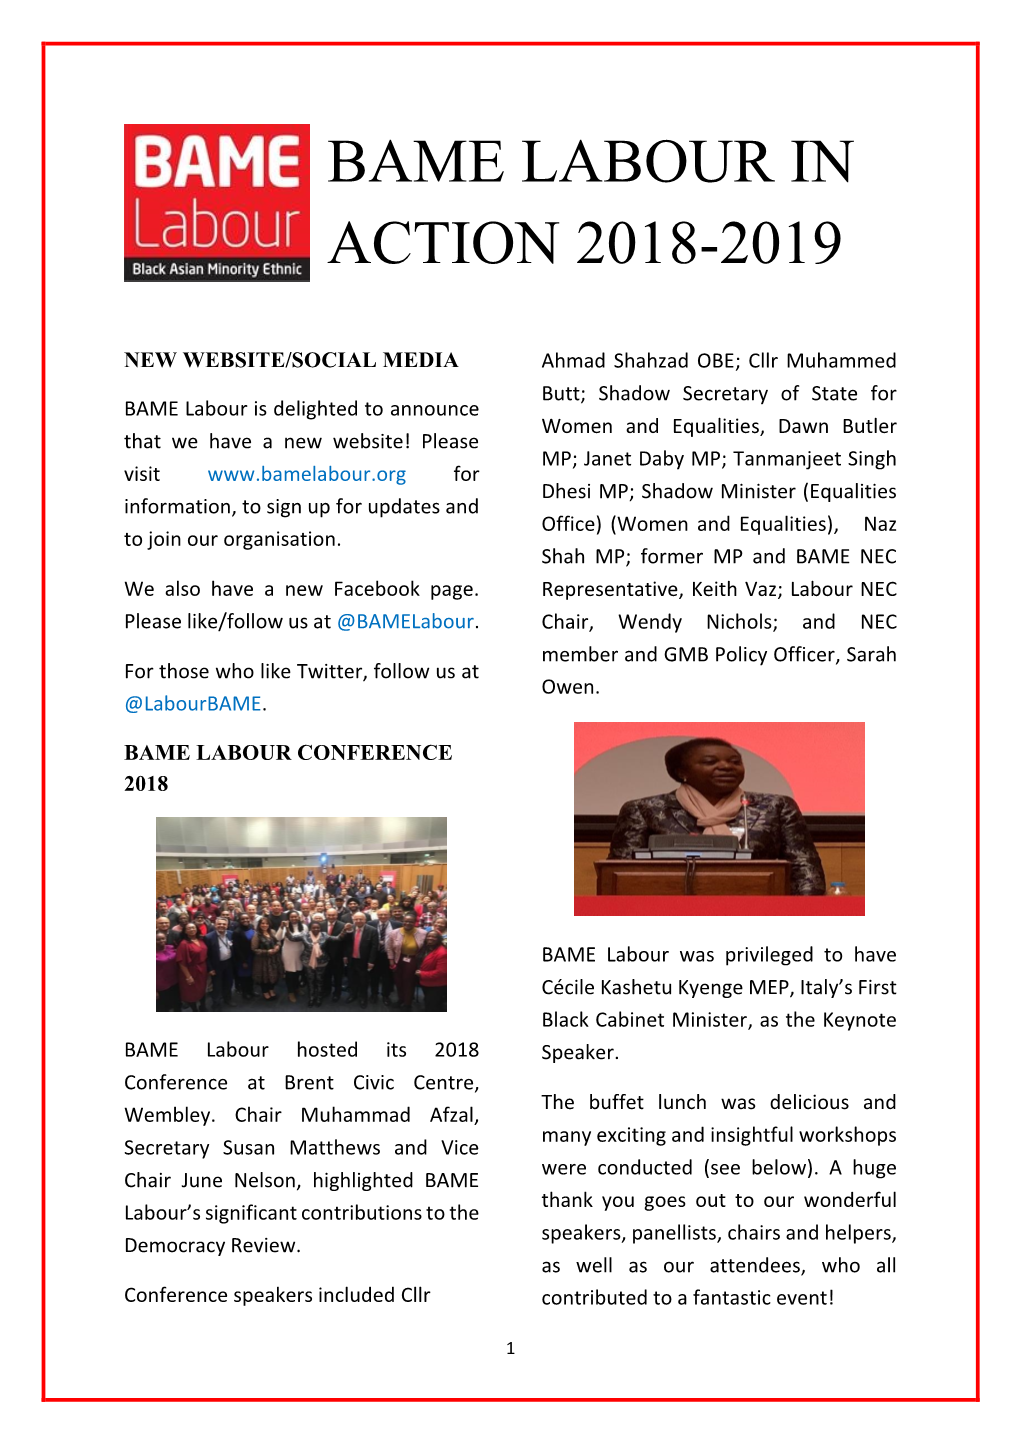 Bame Labour in Action 2018-2019